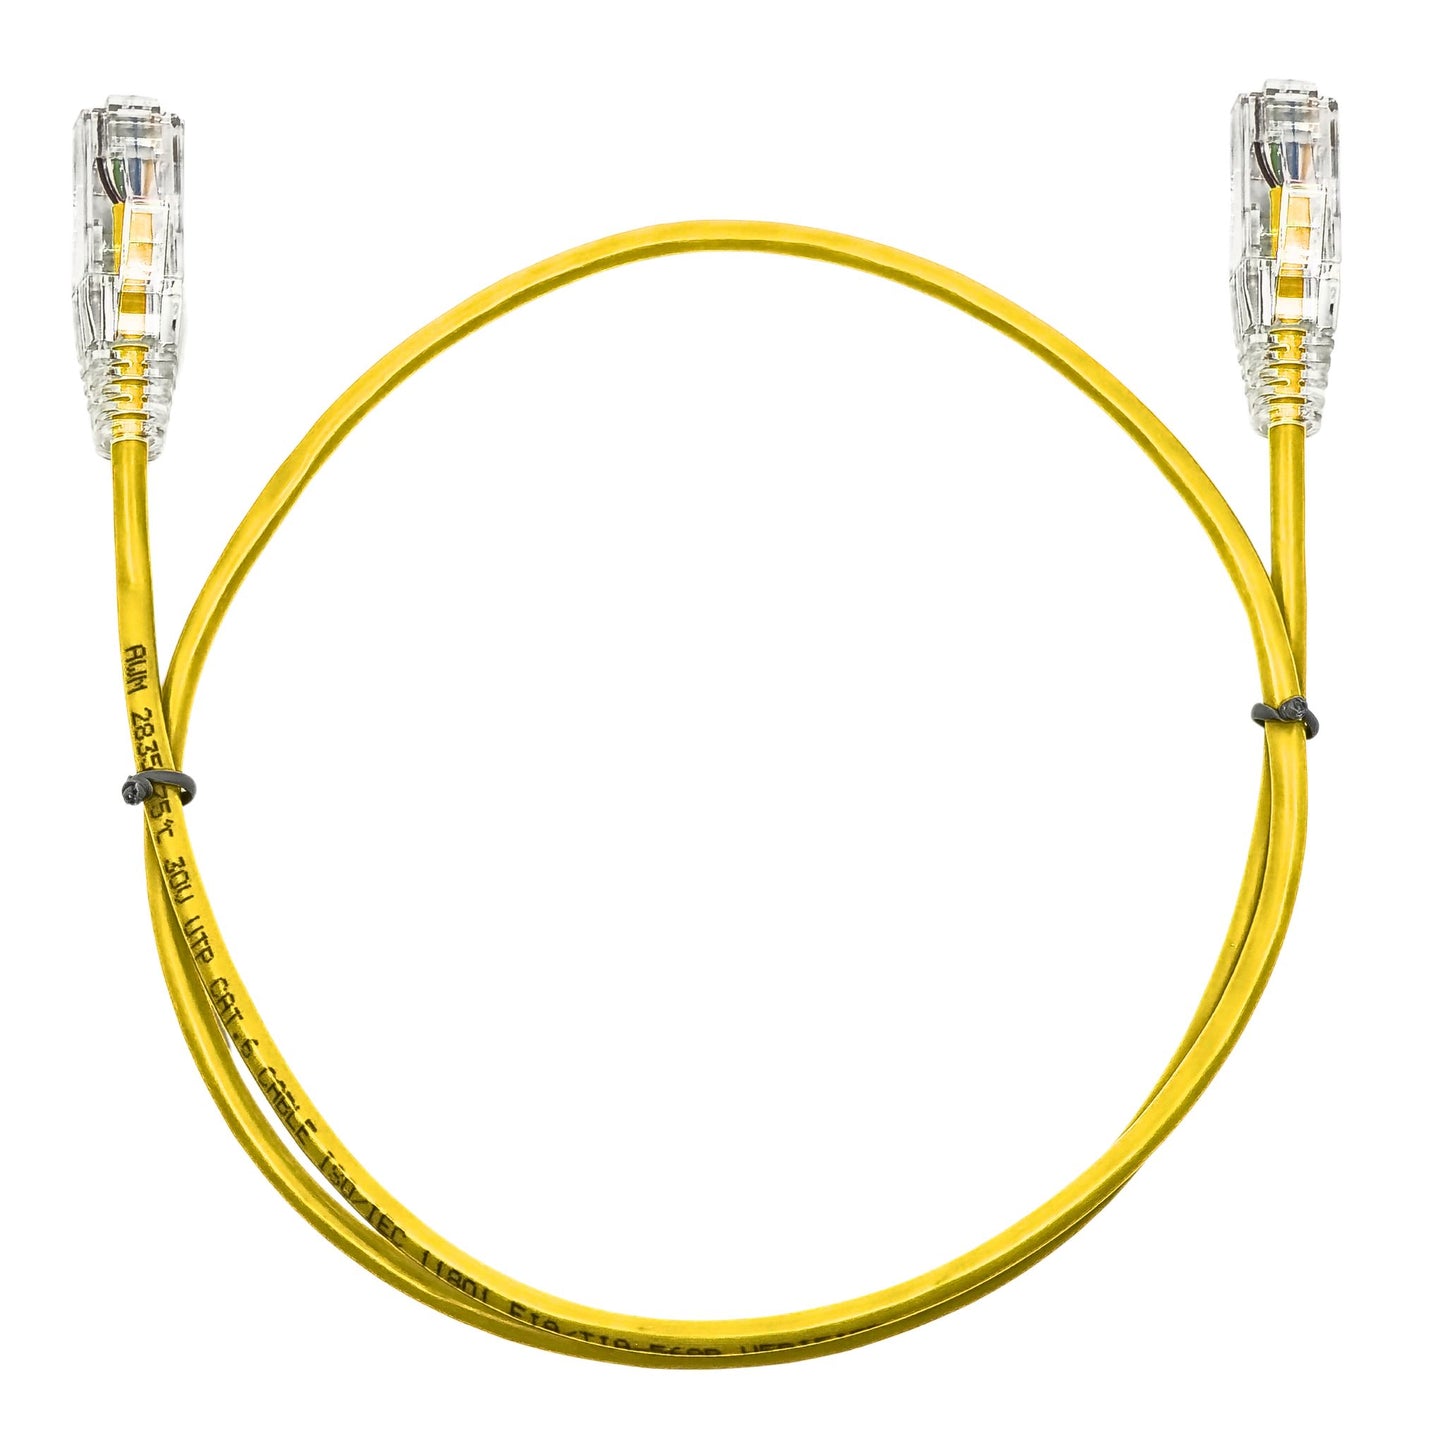 0.15M CAT6 Slim Network Cable - Yellow